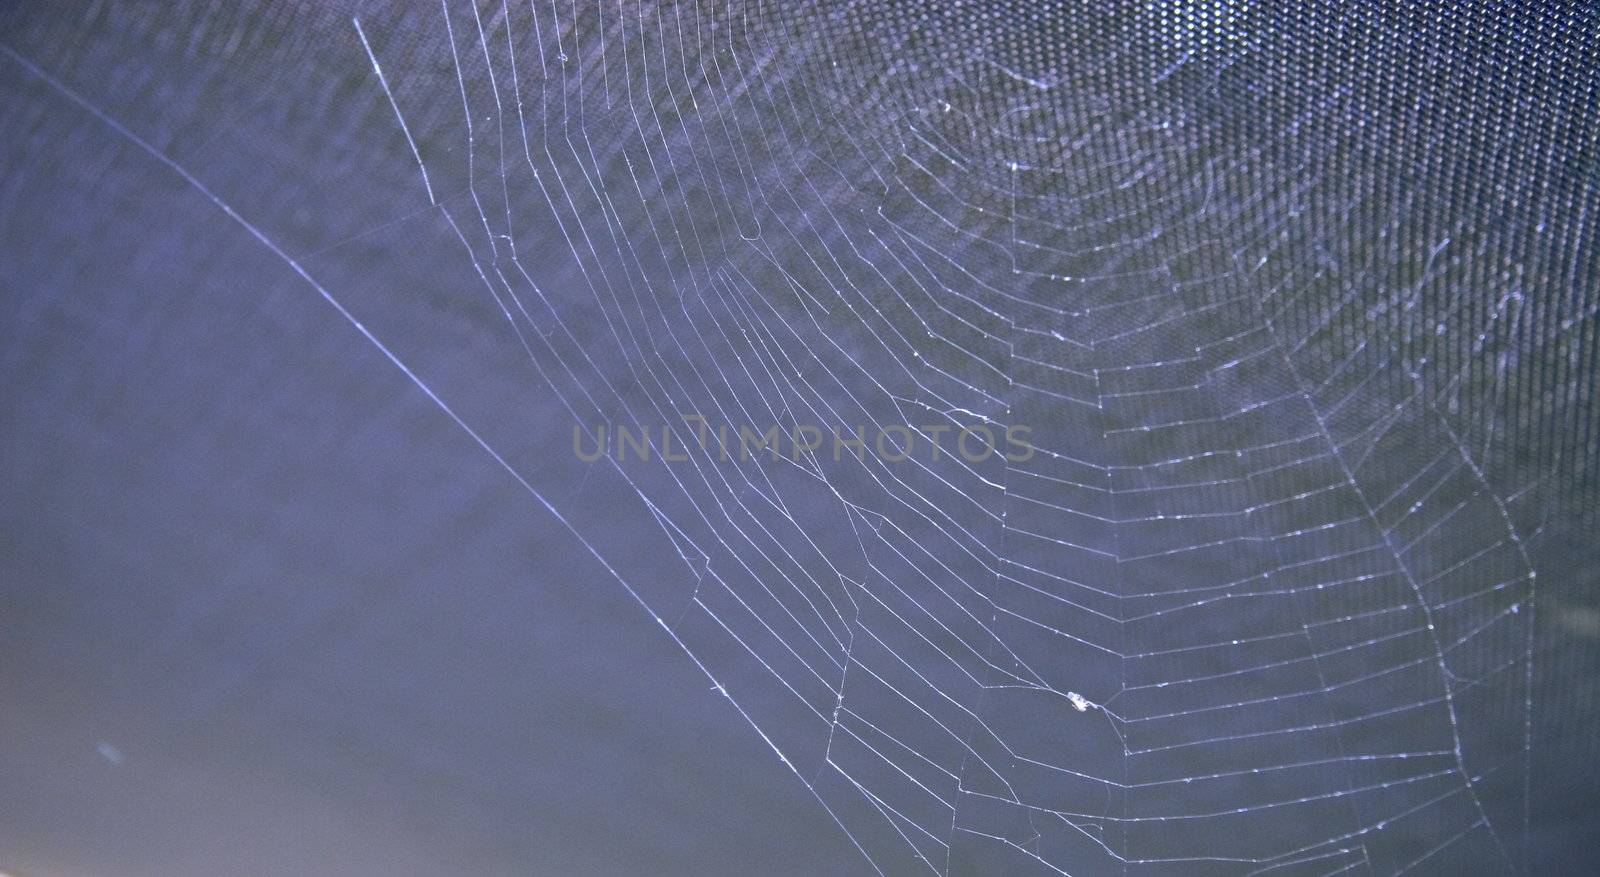 strong spiders web against a blue background